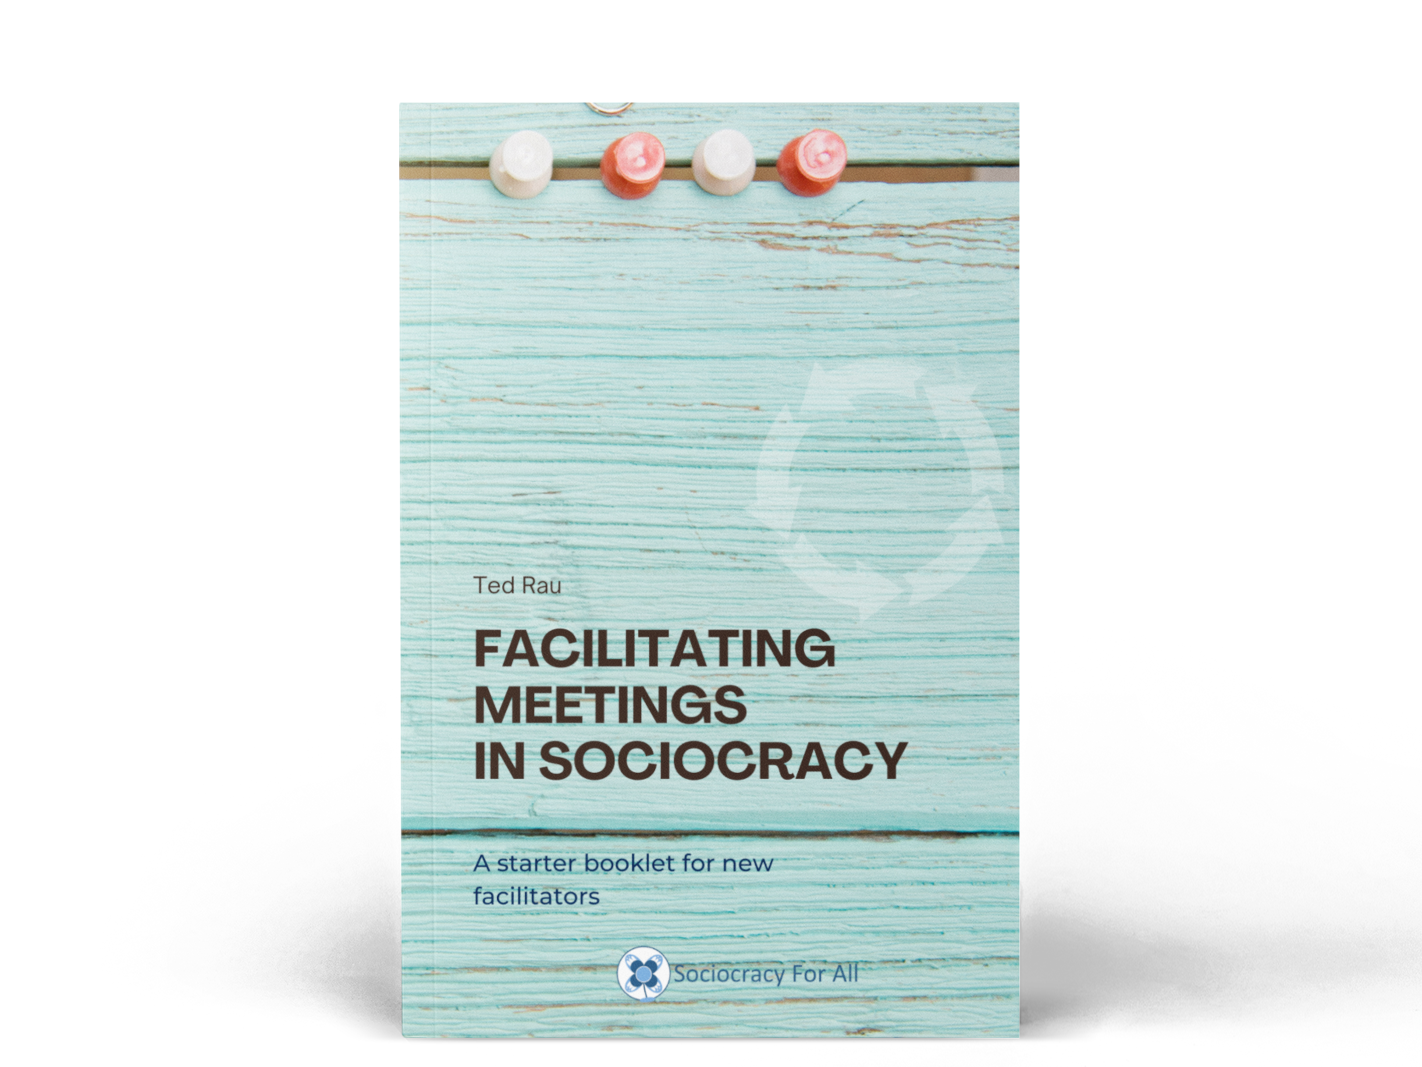 e book mockup template over a white background a9912 2 1 edited 1 - books,sociocracy books,books from sociocracy for all,books from sociocracy - Sociocracy For All